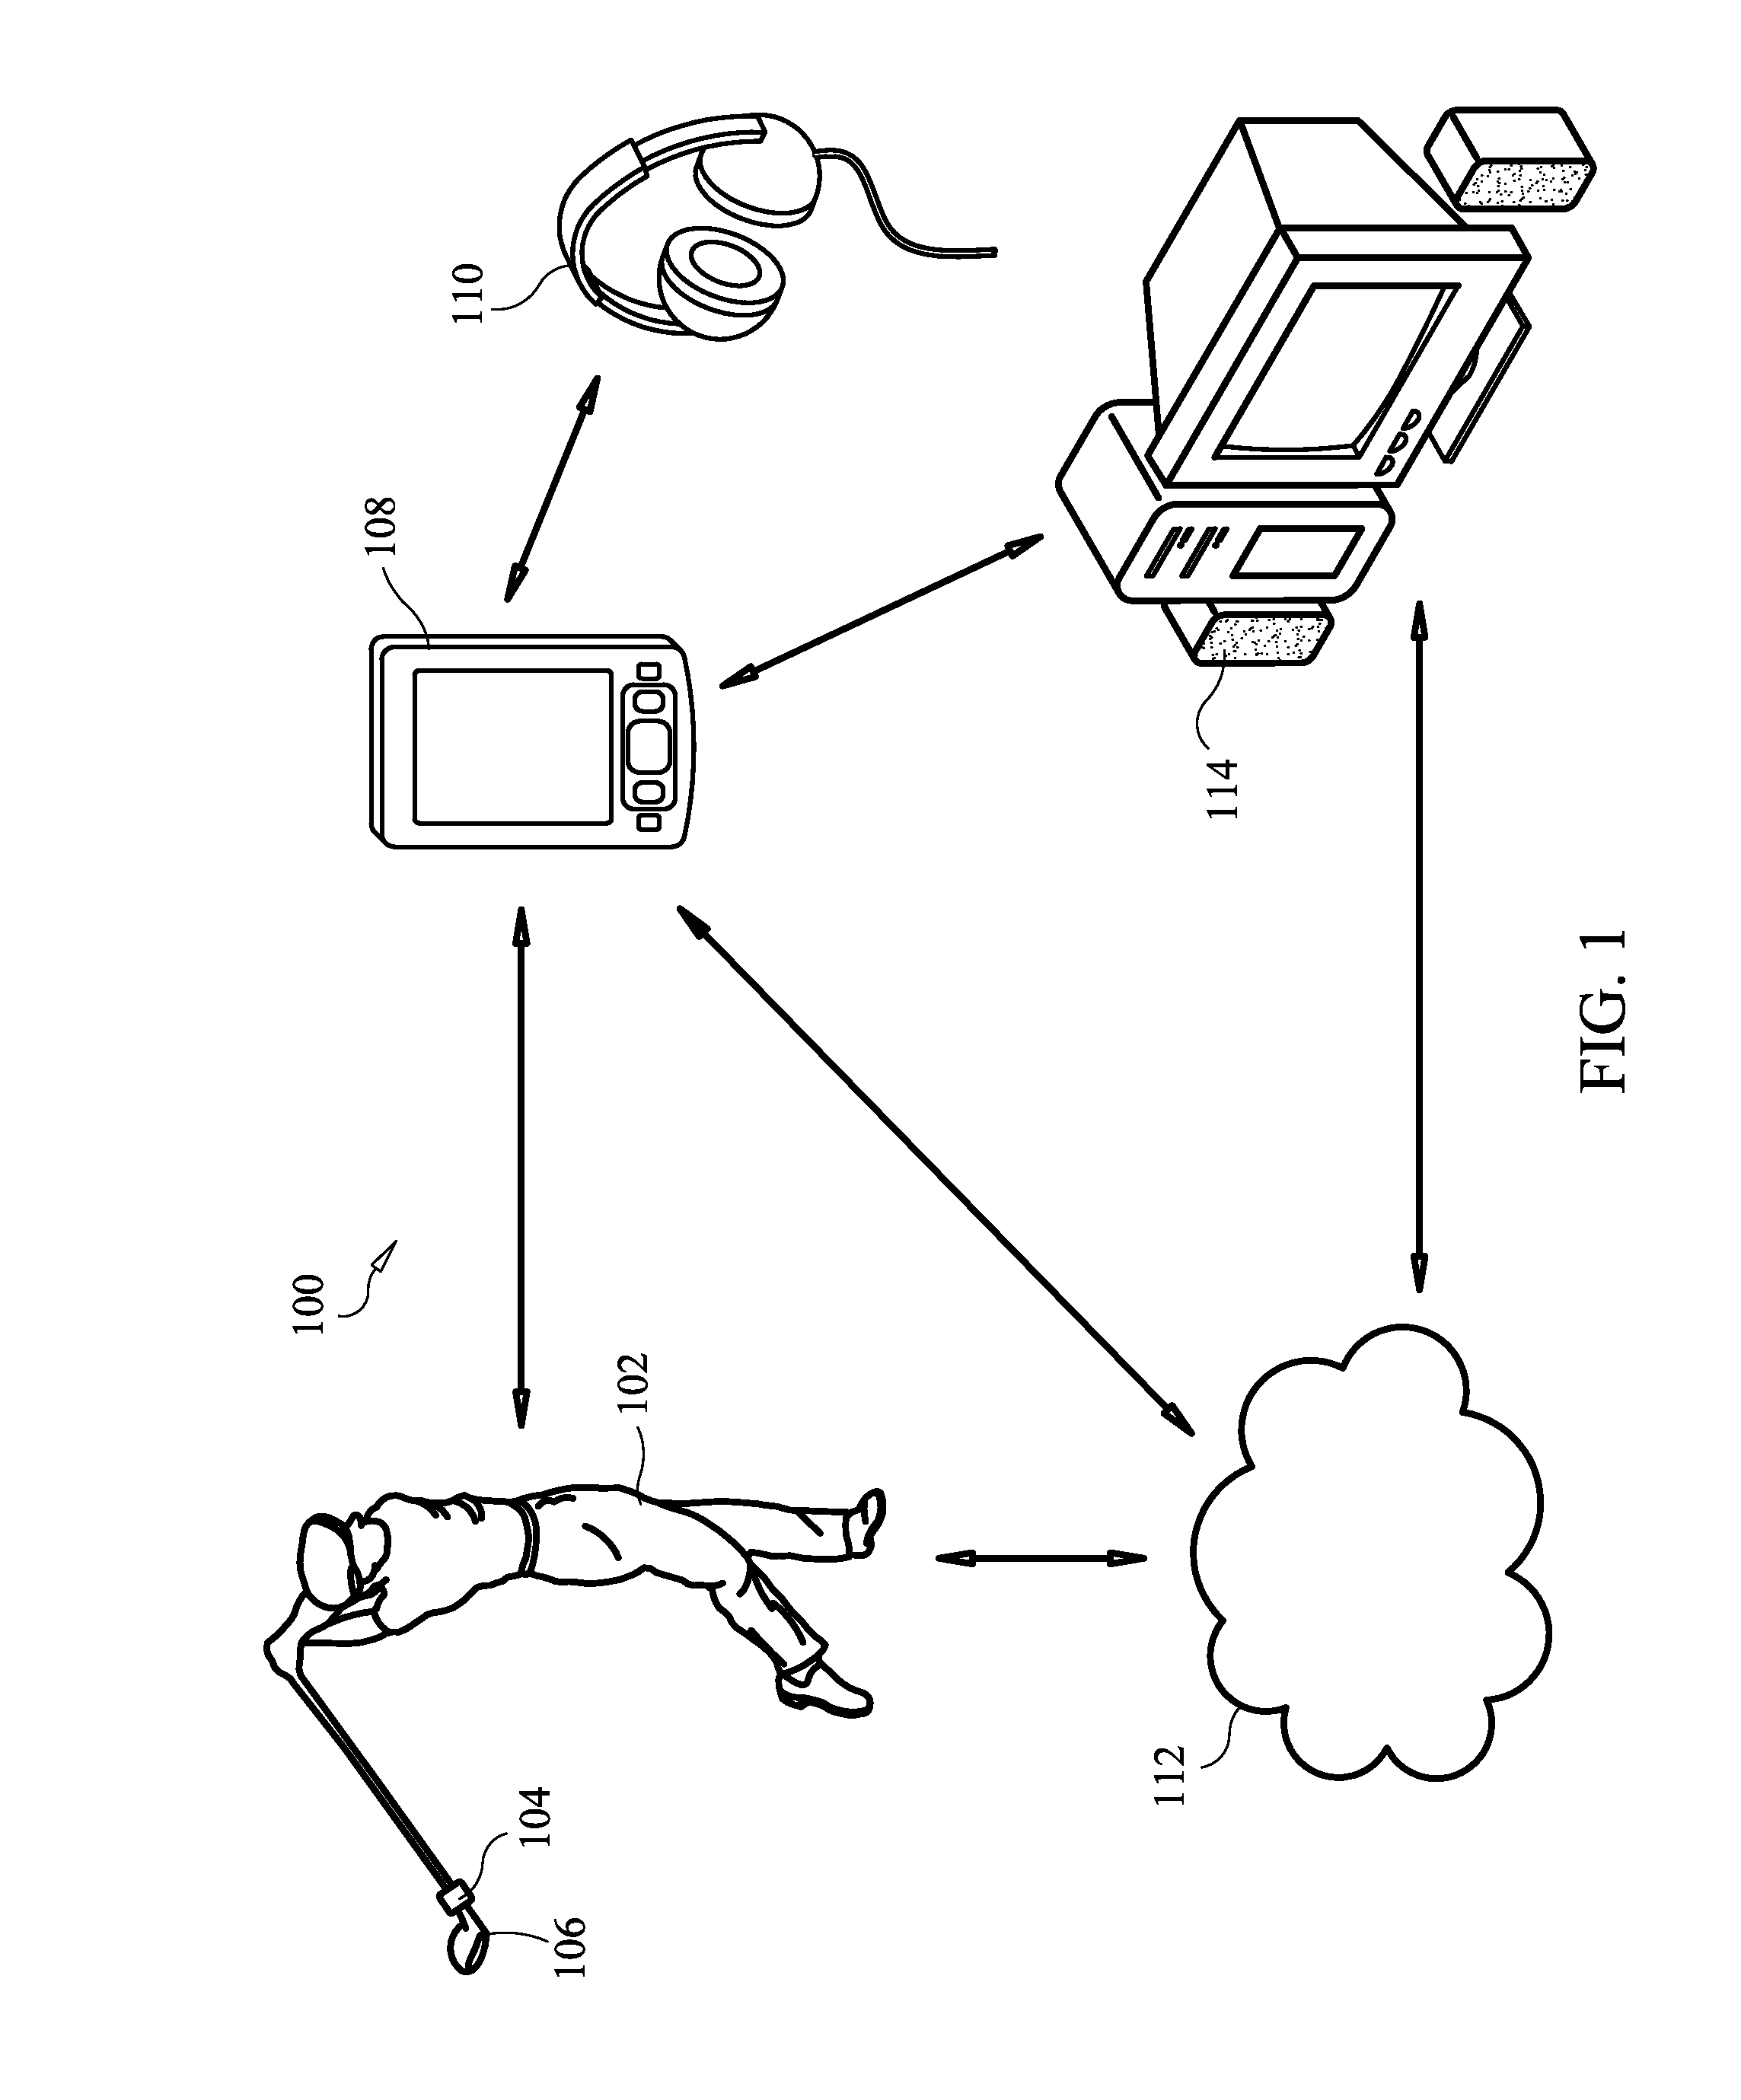 Systems and methods for measuring and/or analyzing swing information